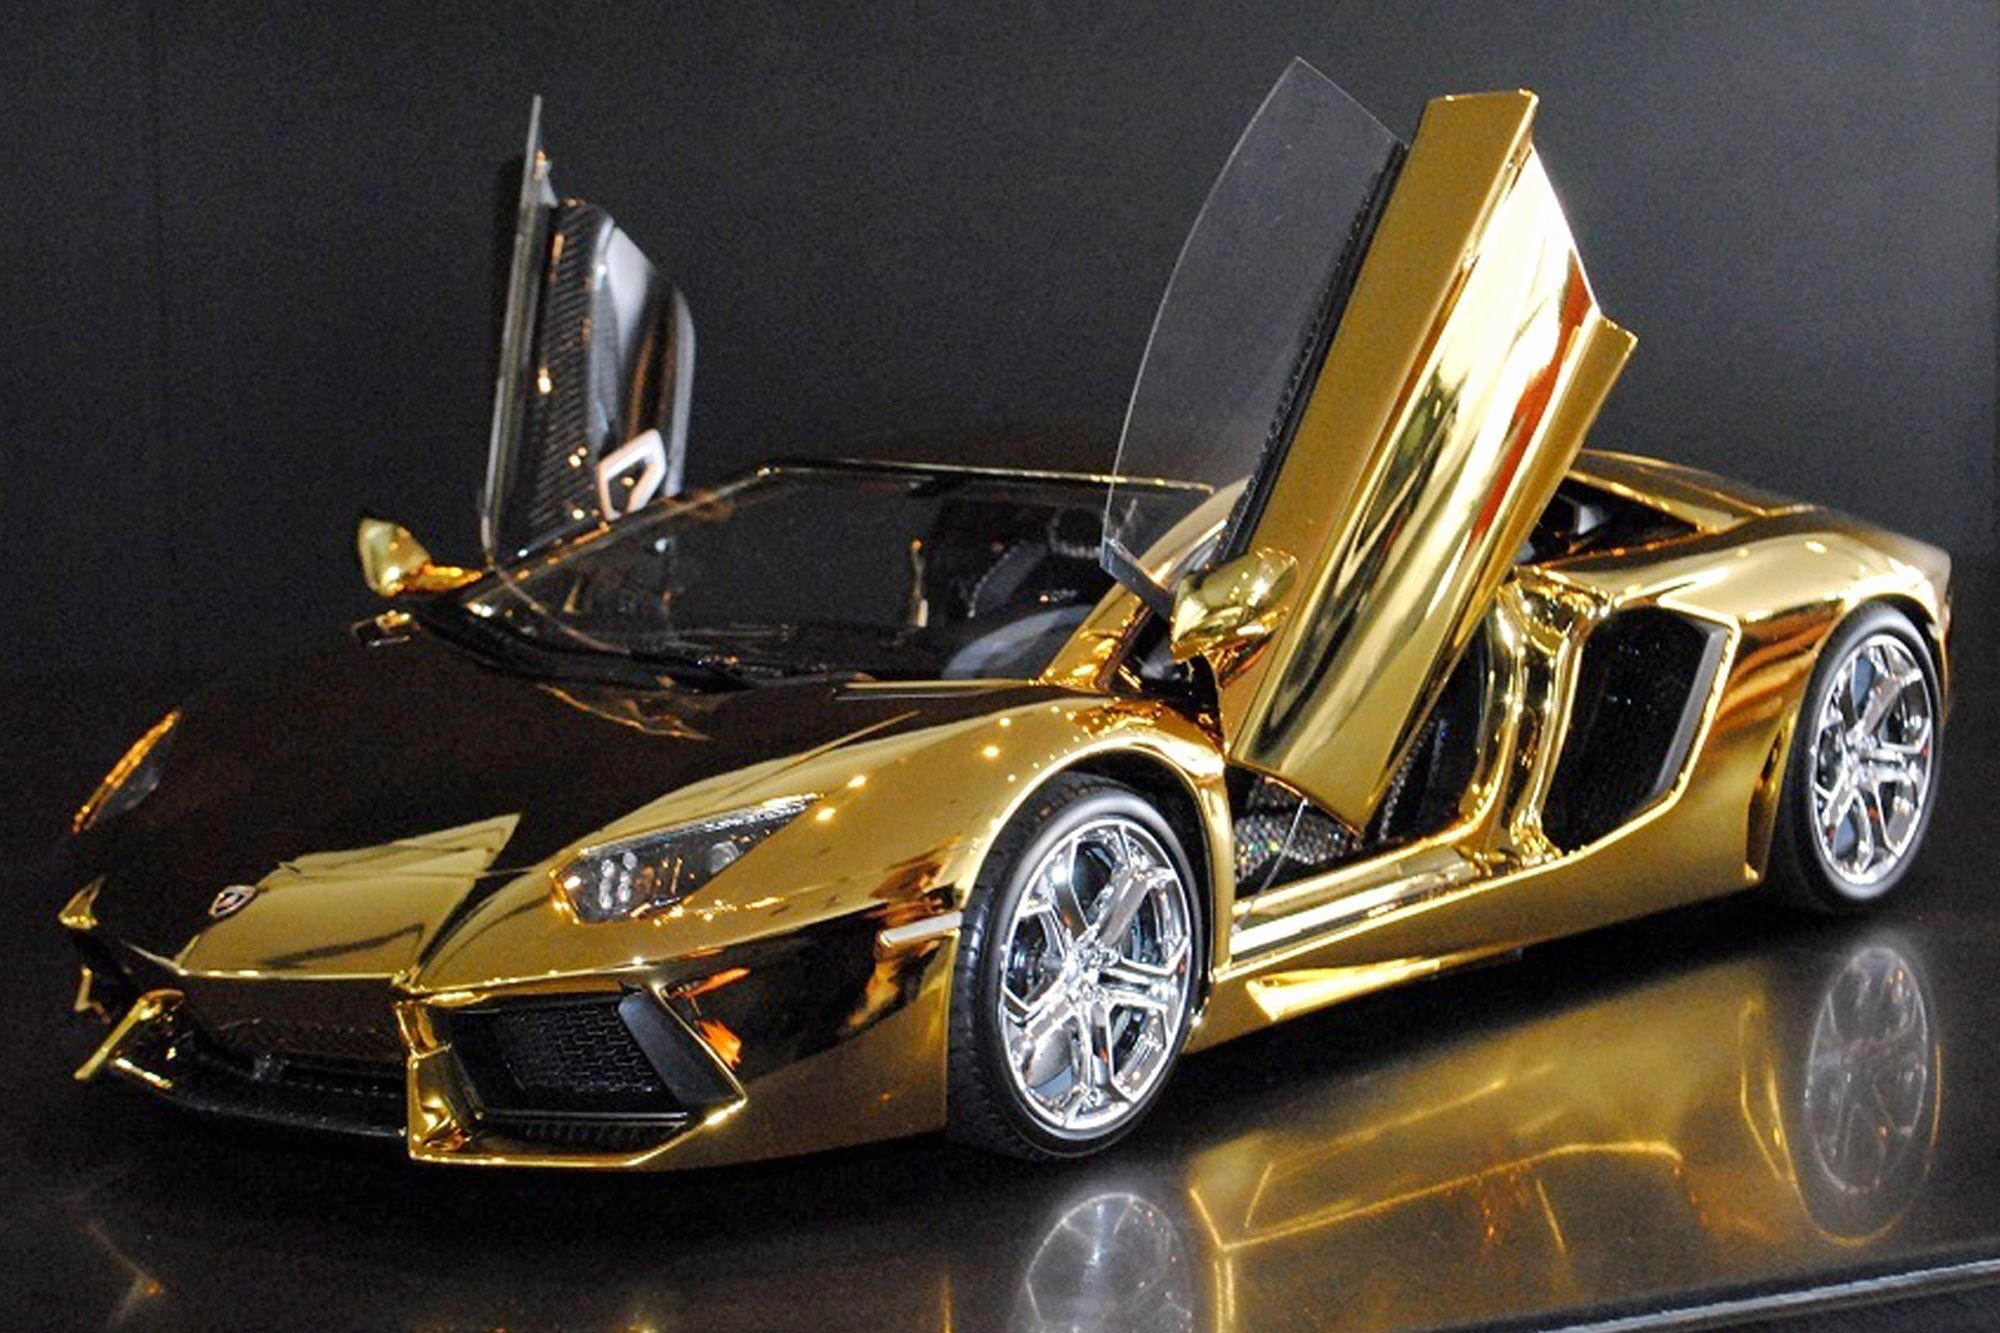 Best Of Gold Lamborghini Wallpaper This Month of The Hudson